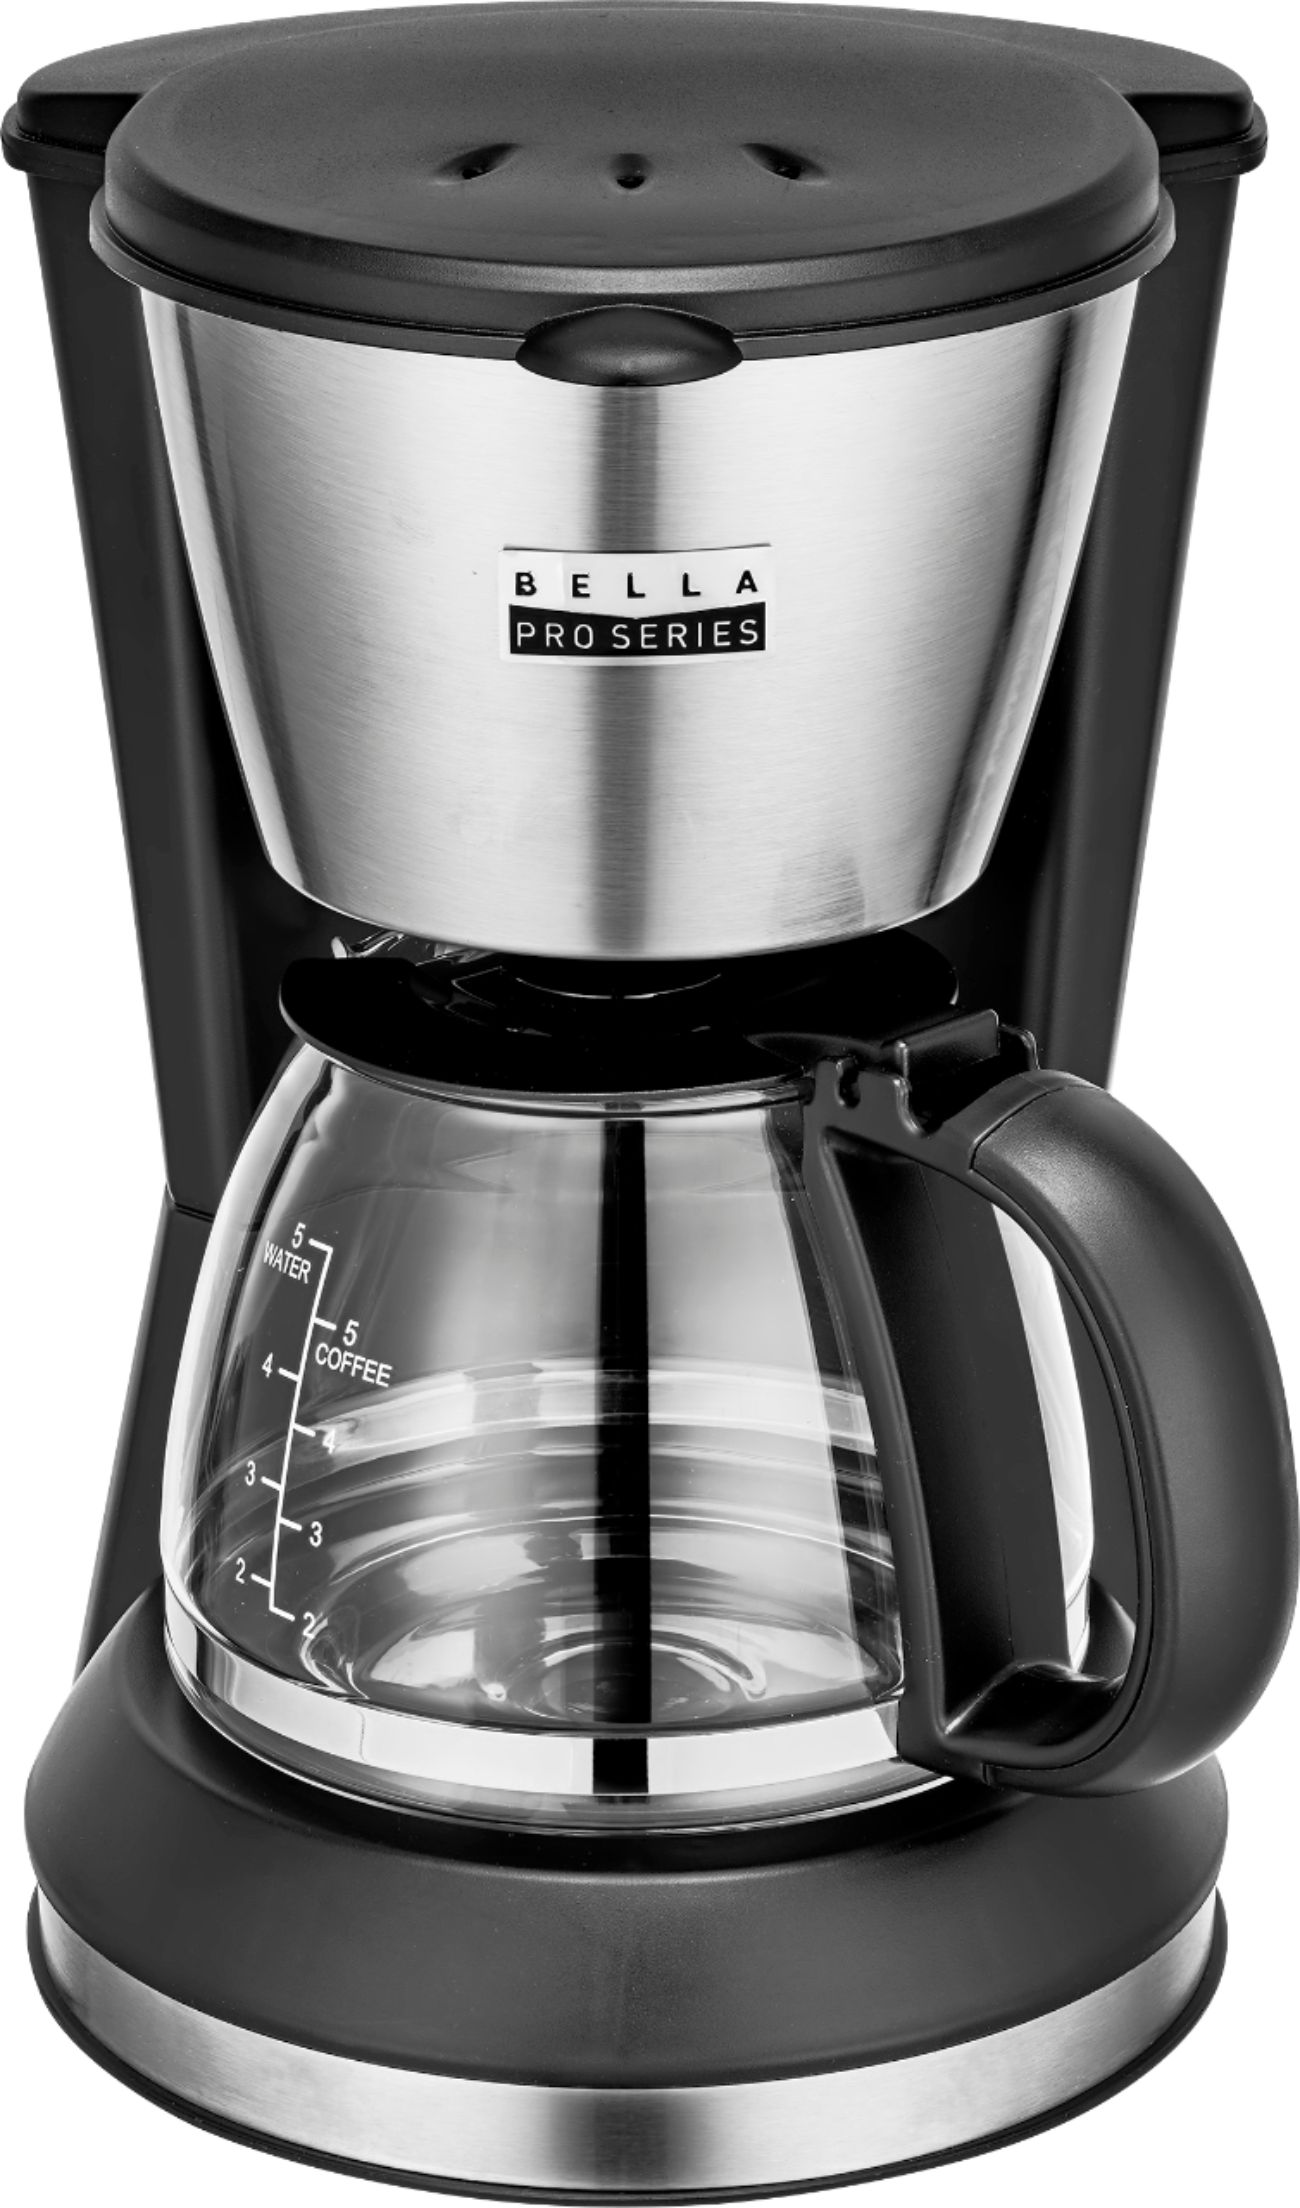 Bella Pro Series 5-Cup Coffee Maker - Stainless Steel (90071) $9.99